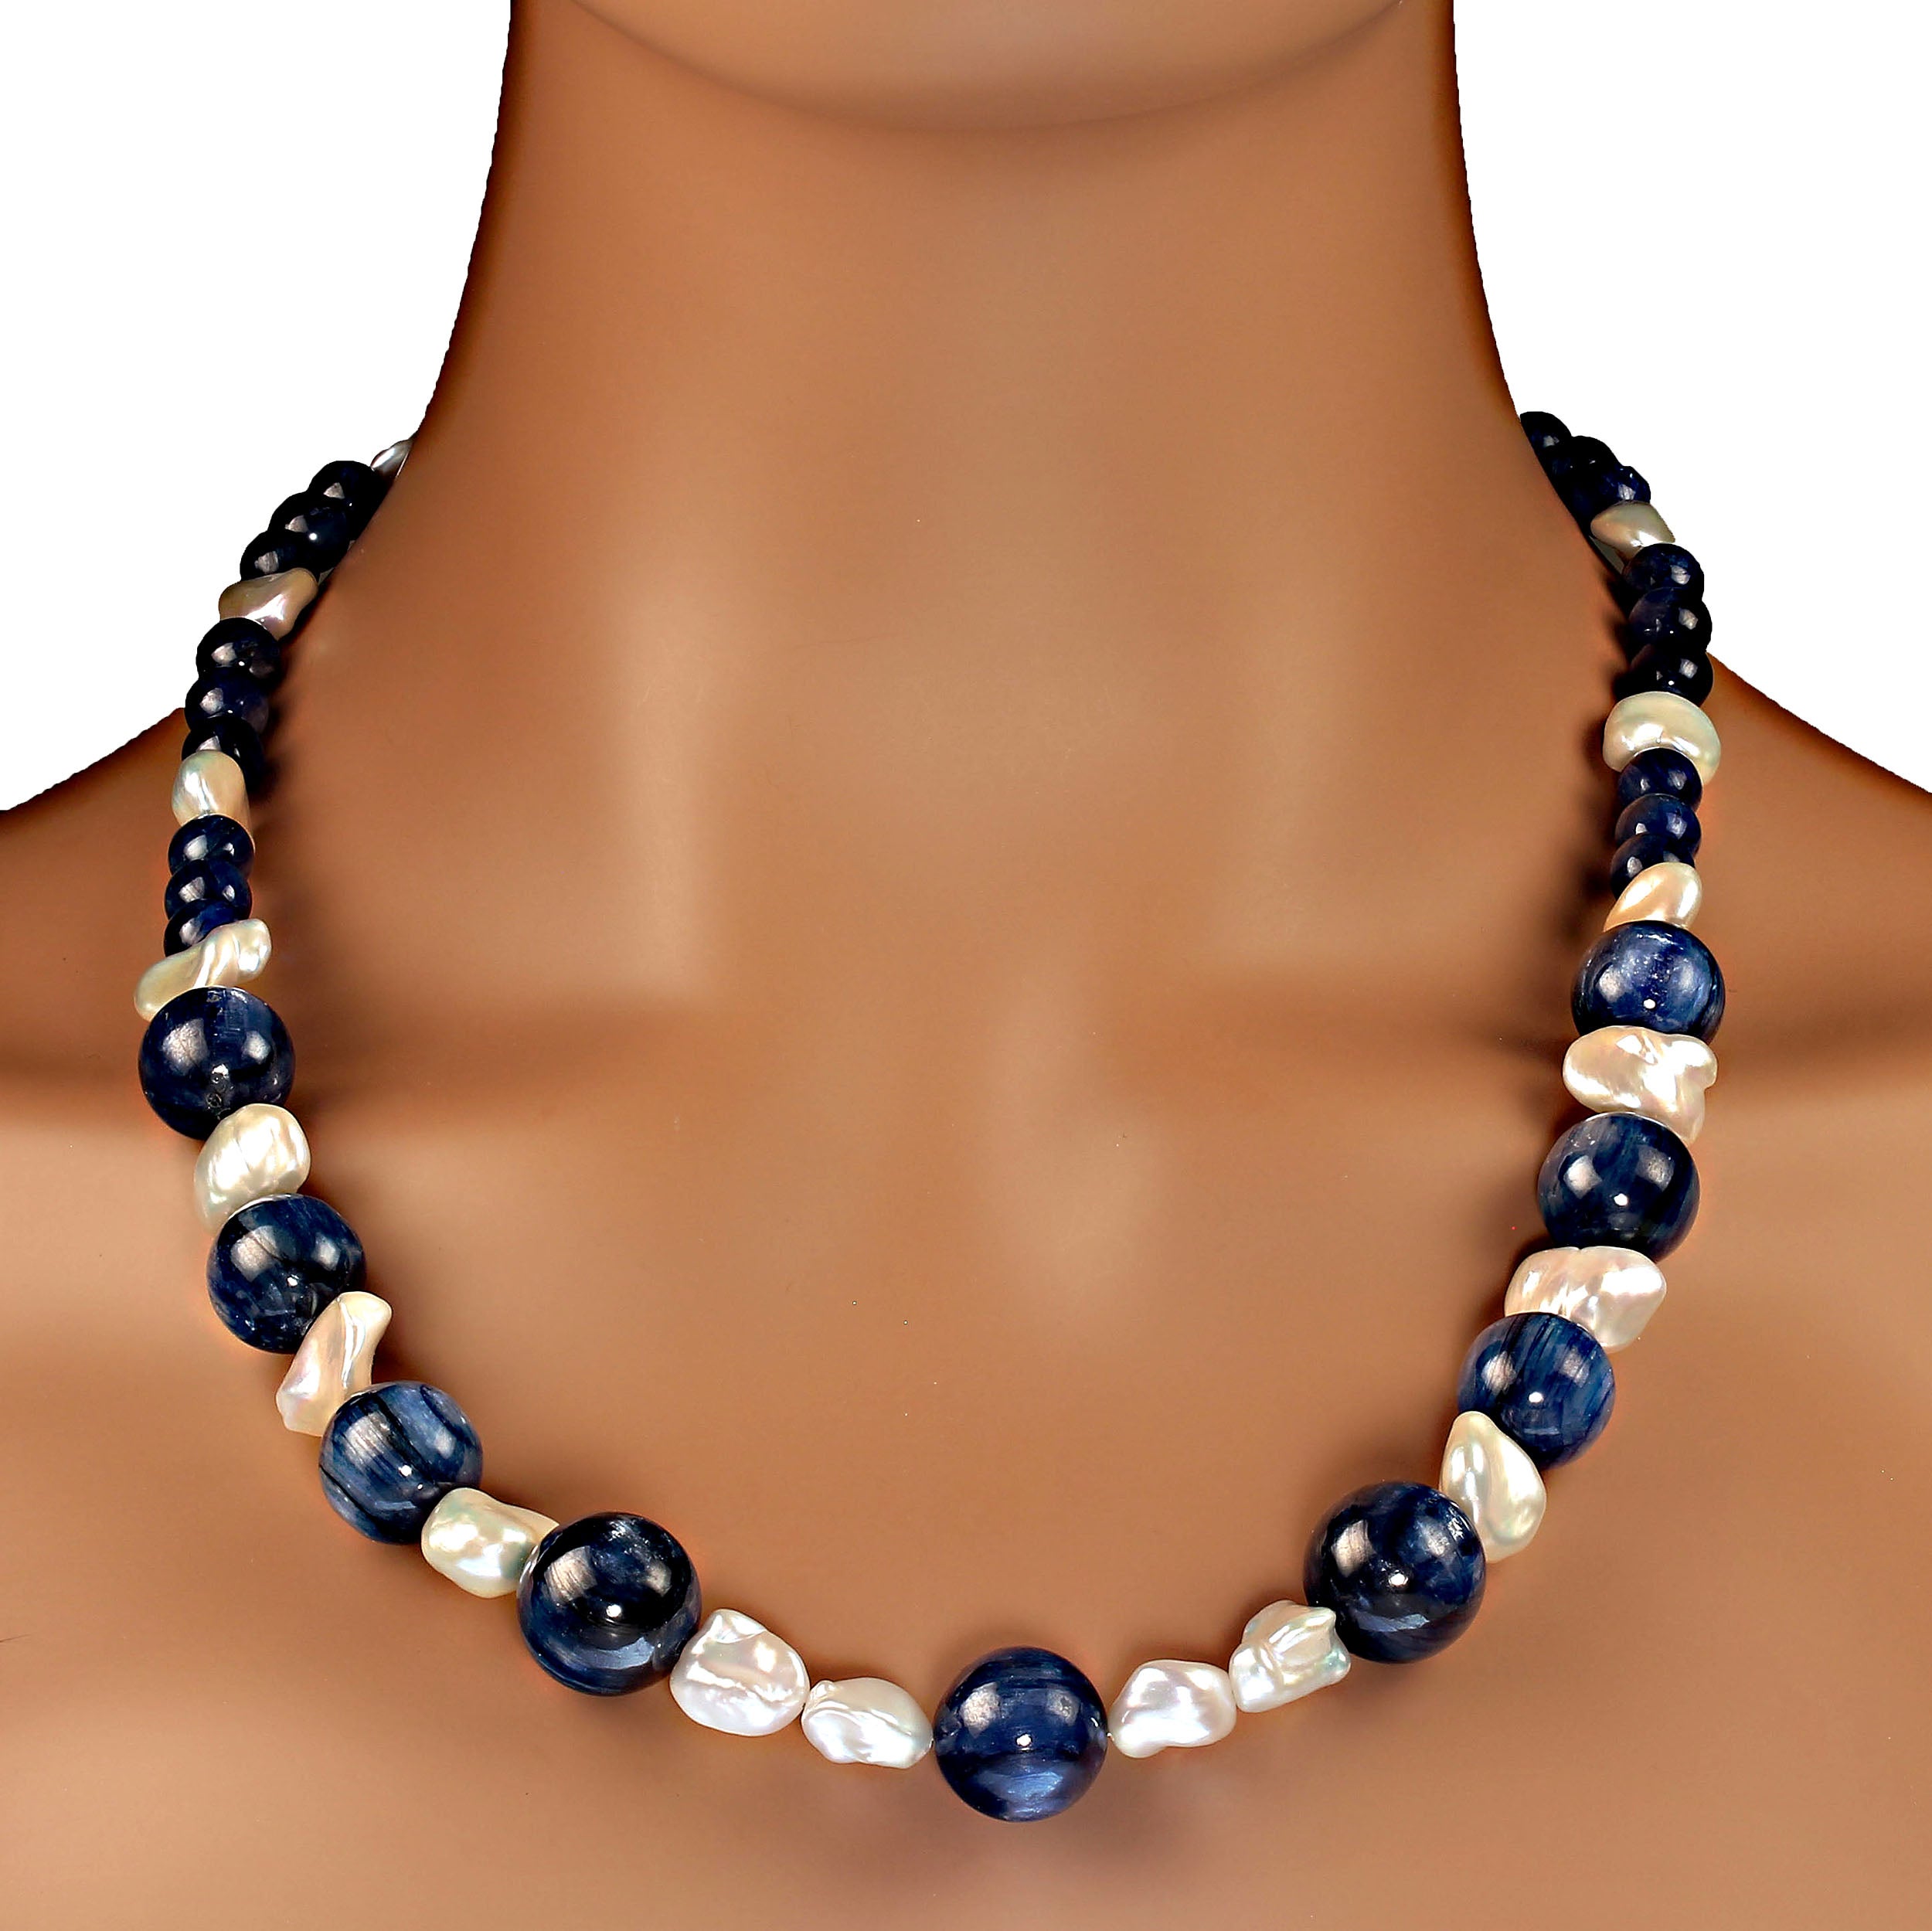 AJD Glowing Kyanite and White Iridescent Pearl 23 Inch necklace Perfect Gift! For Sale